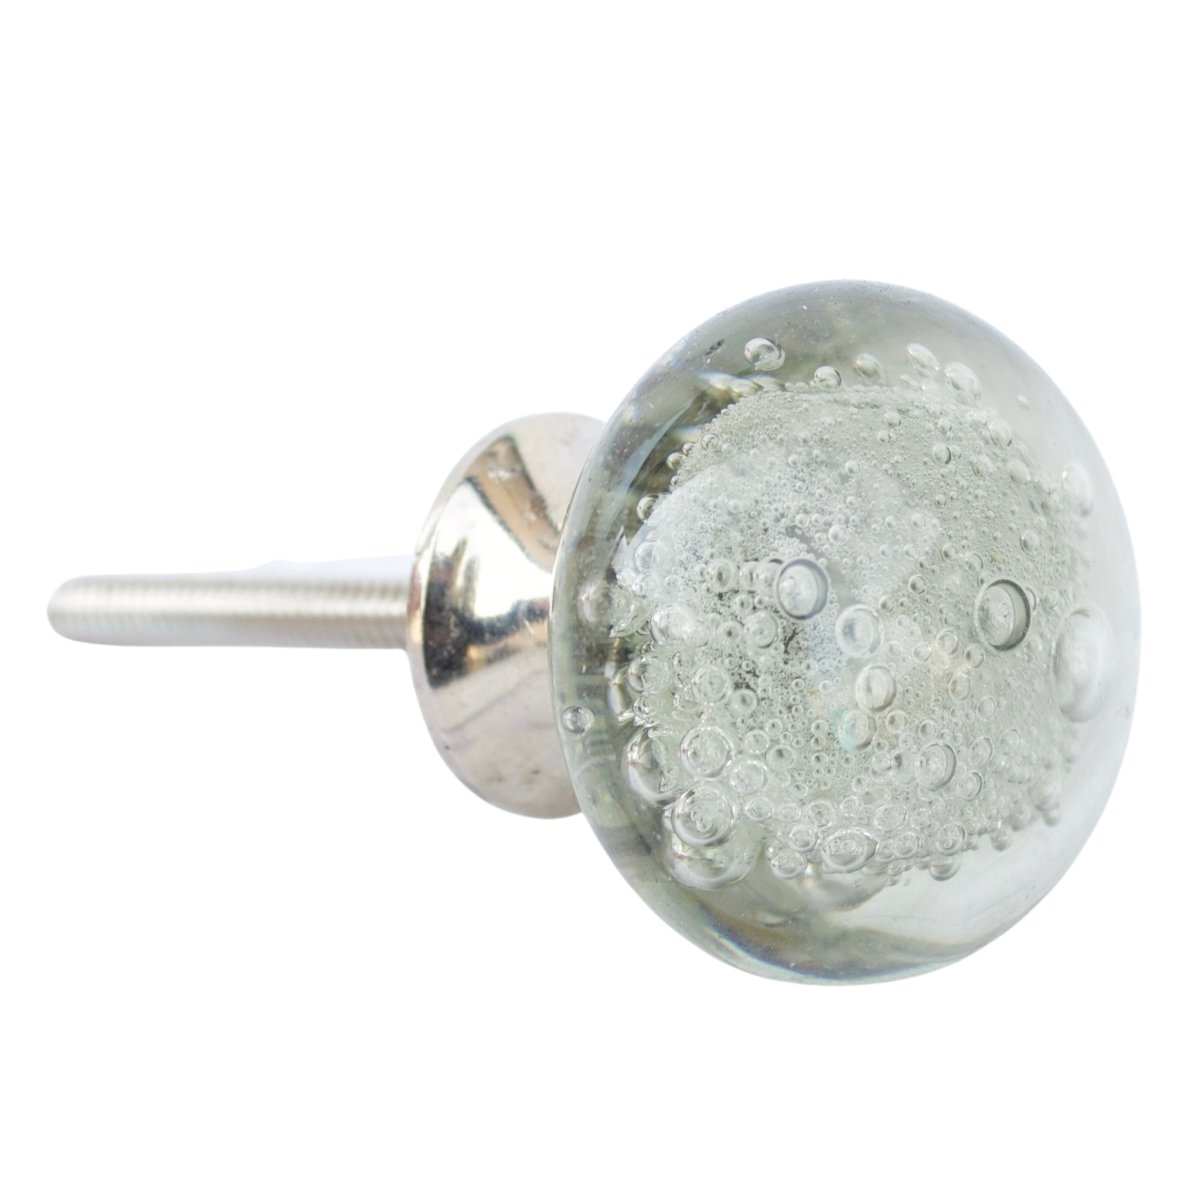 Gray Glass Cabinet Knob with Bubbles - DaRosa Creations